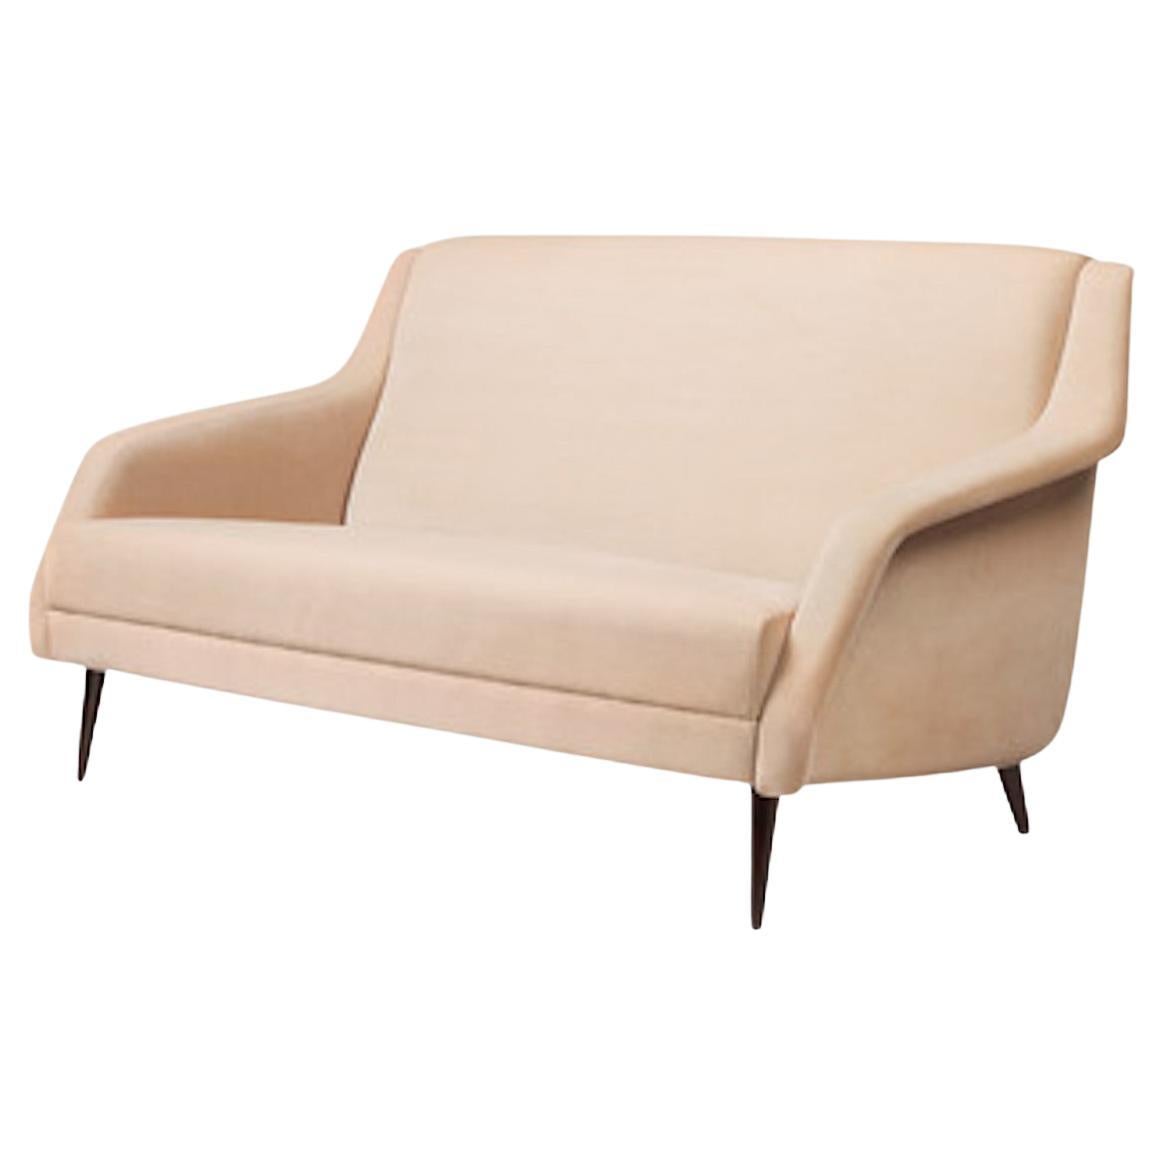 CDC.1 Lounge Chair was designed by Carlo De Carli in 1954 and features the elegantly minimalist design style, typical of the era. The CDC.1 Lounge Chair meets the ground in a graceful and slender way; its arms swooping like wings, giving the